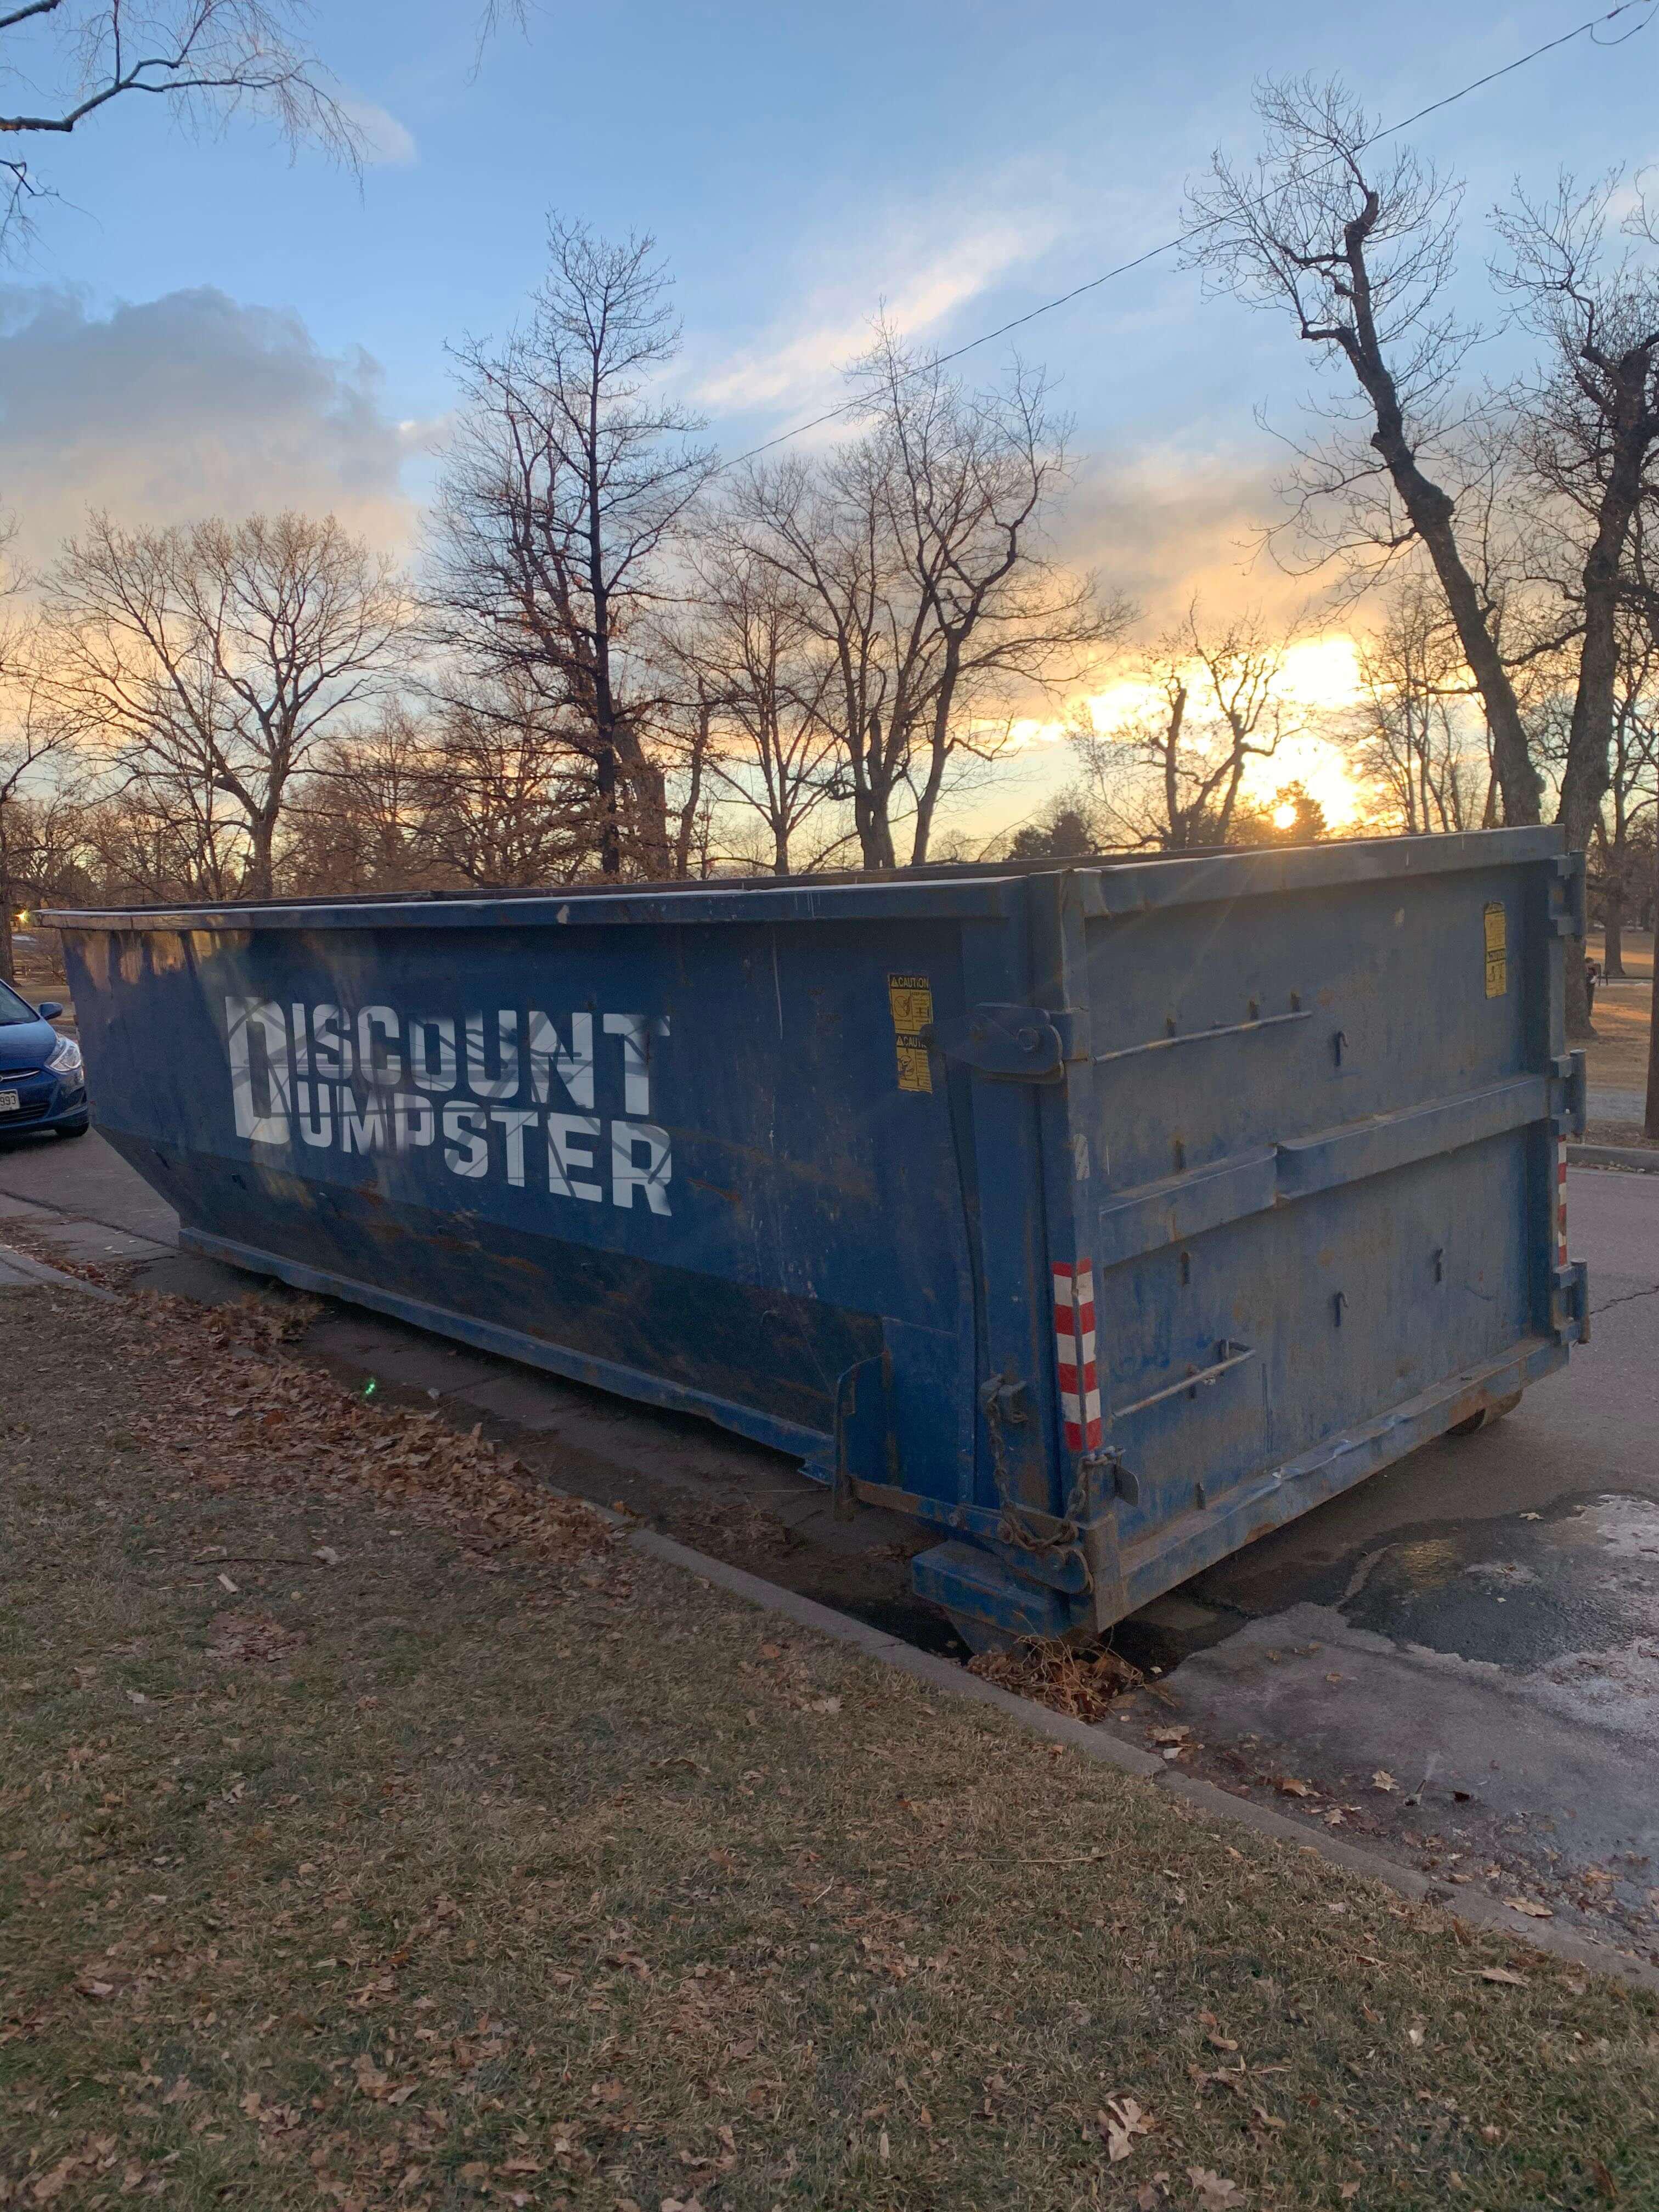 Discount dumpster is here to provide roll off dumpsters rentals and waste removal for your next construction project in chicago il